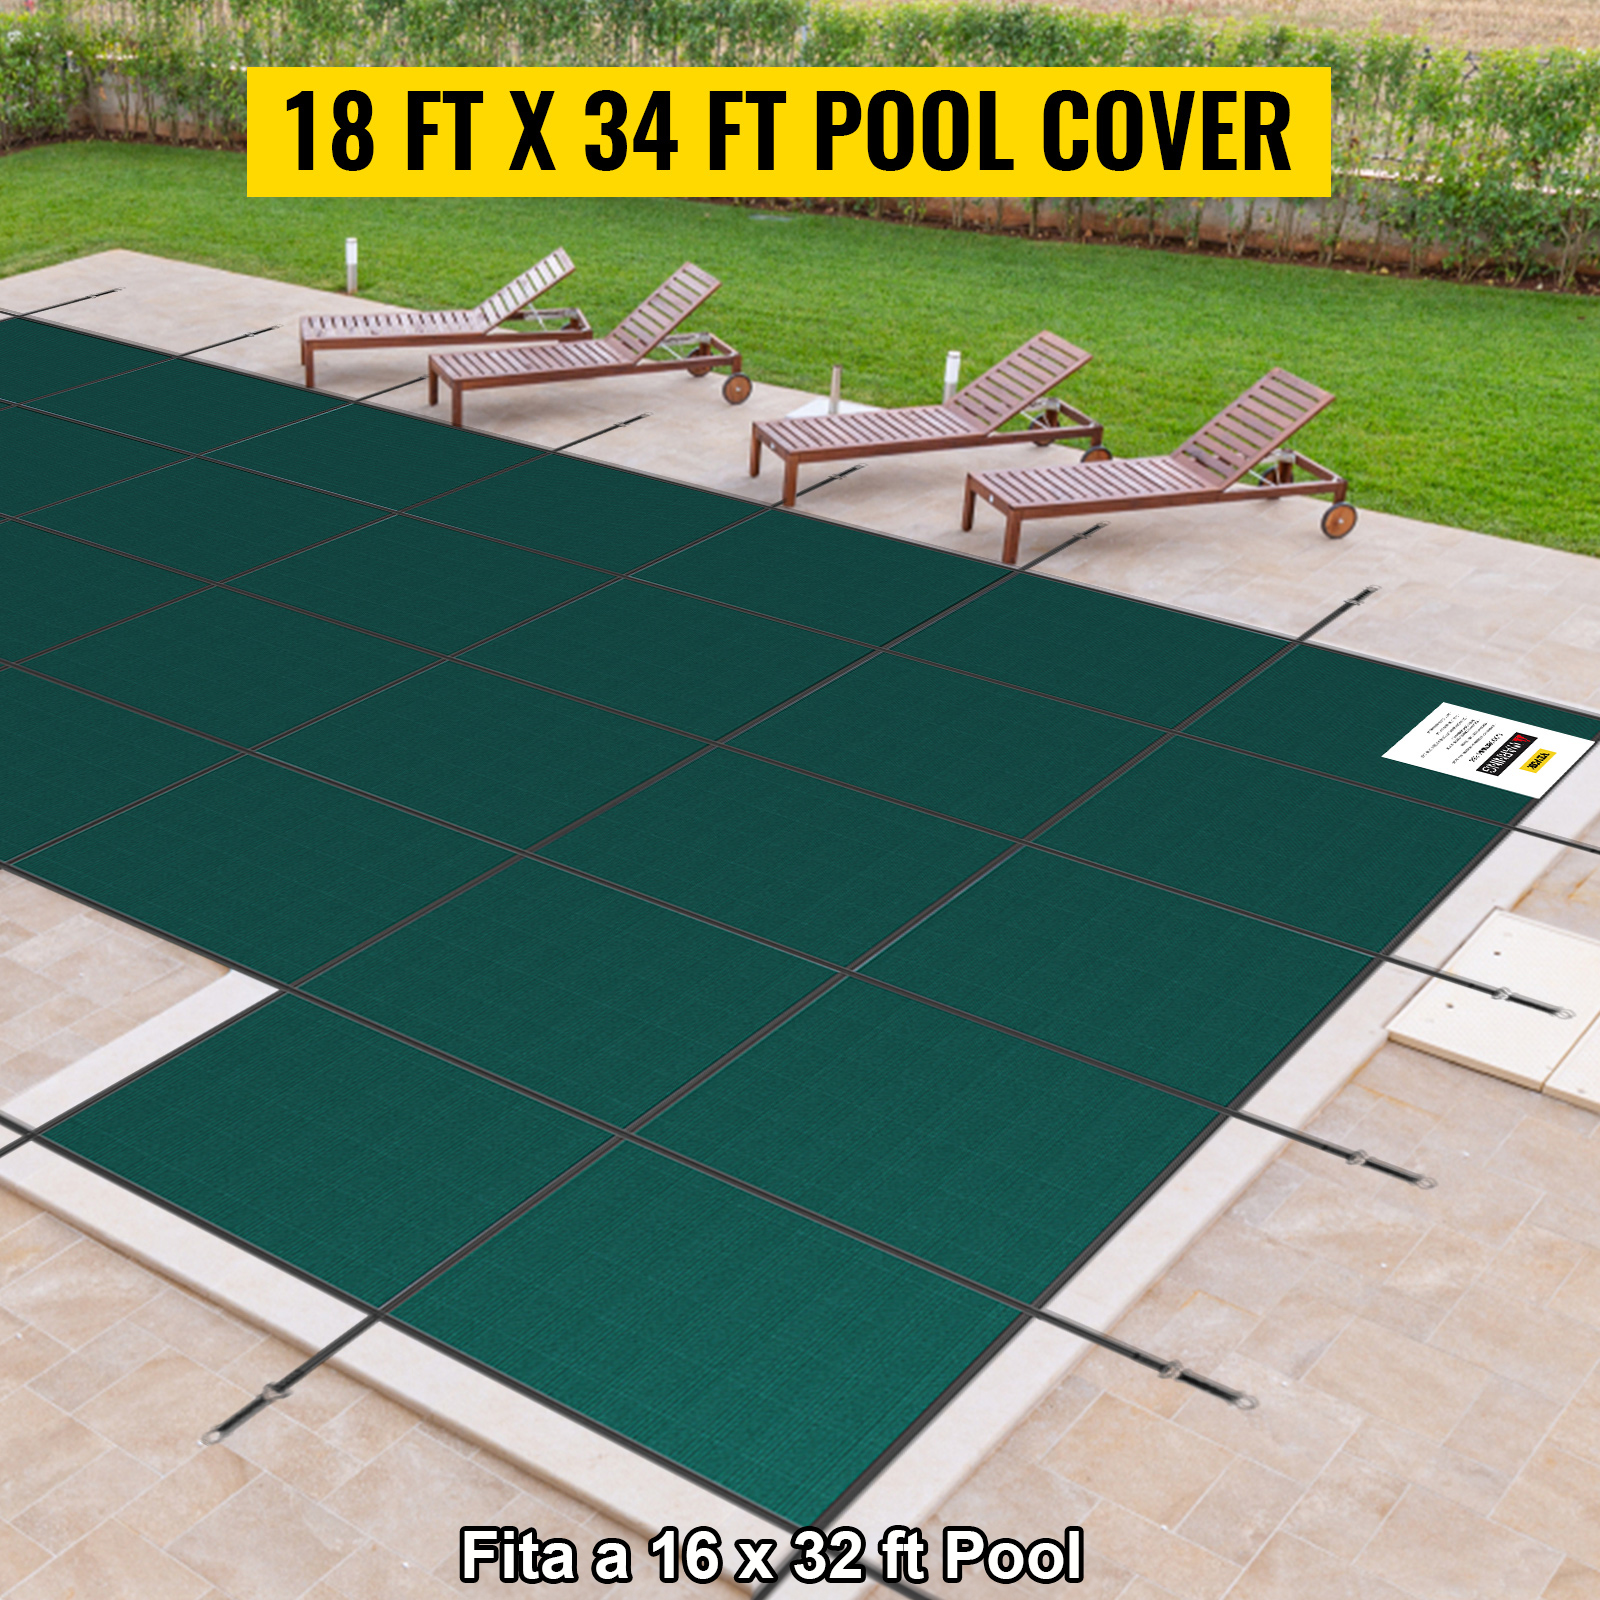 VEVOR Pool Cover Reel Aluminum Solar Cover Reel for Above Ground Pools 20  ft 